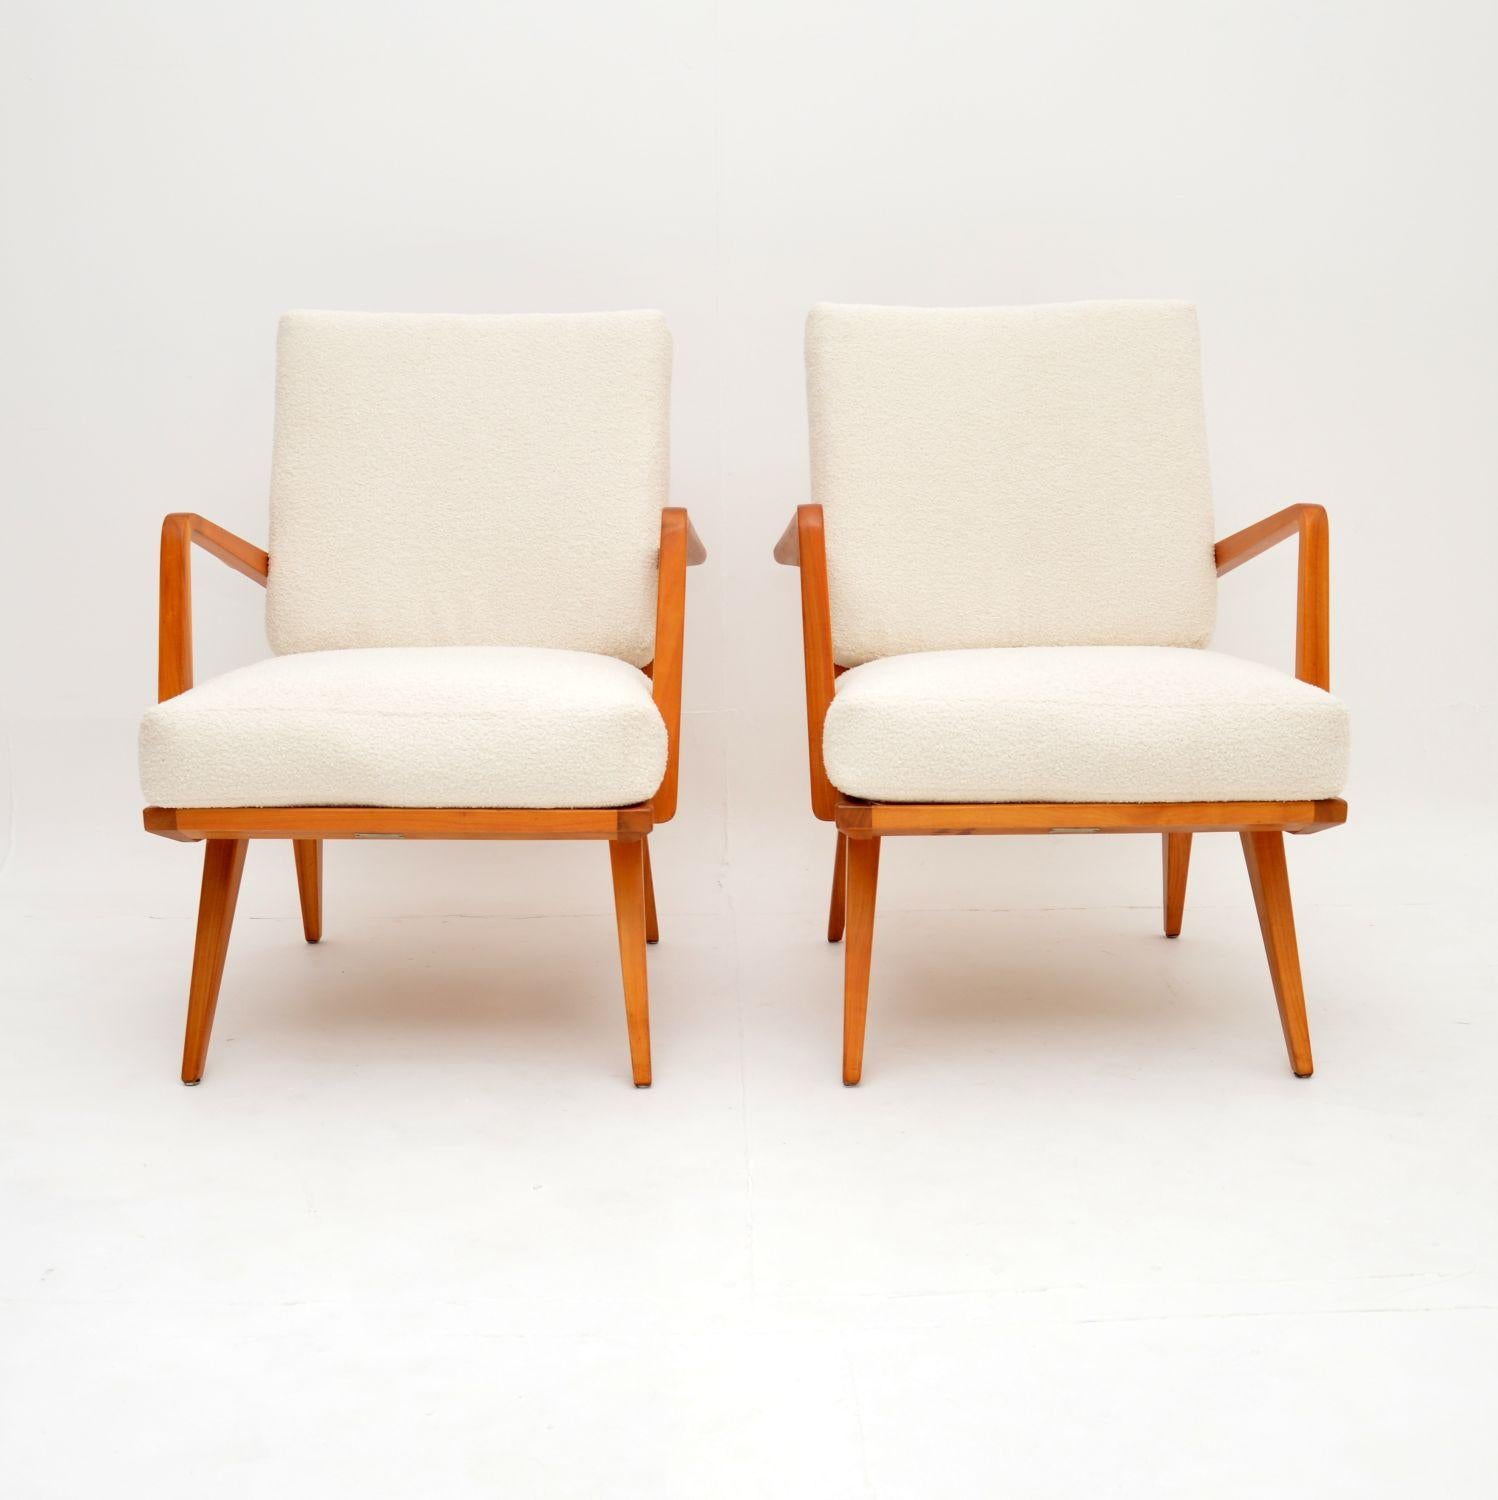 A stylish and very rare model, this pair of solid cherry wood armchairs were made in Germany by Wilhelm Knoll in the 1960’s.

They are of amazing quality and are very comfortable, with a beautiful design. The frames have stunning angles, the cherry